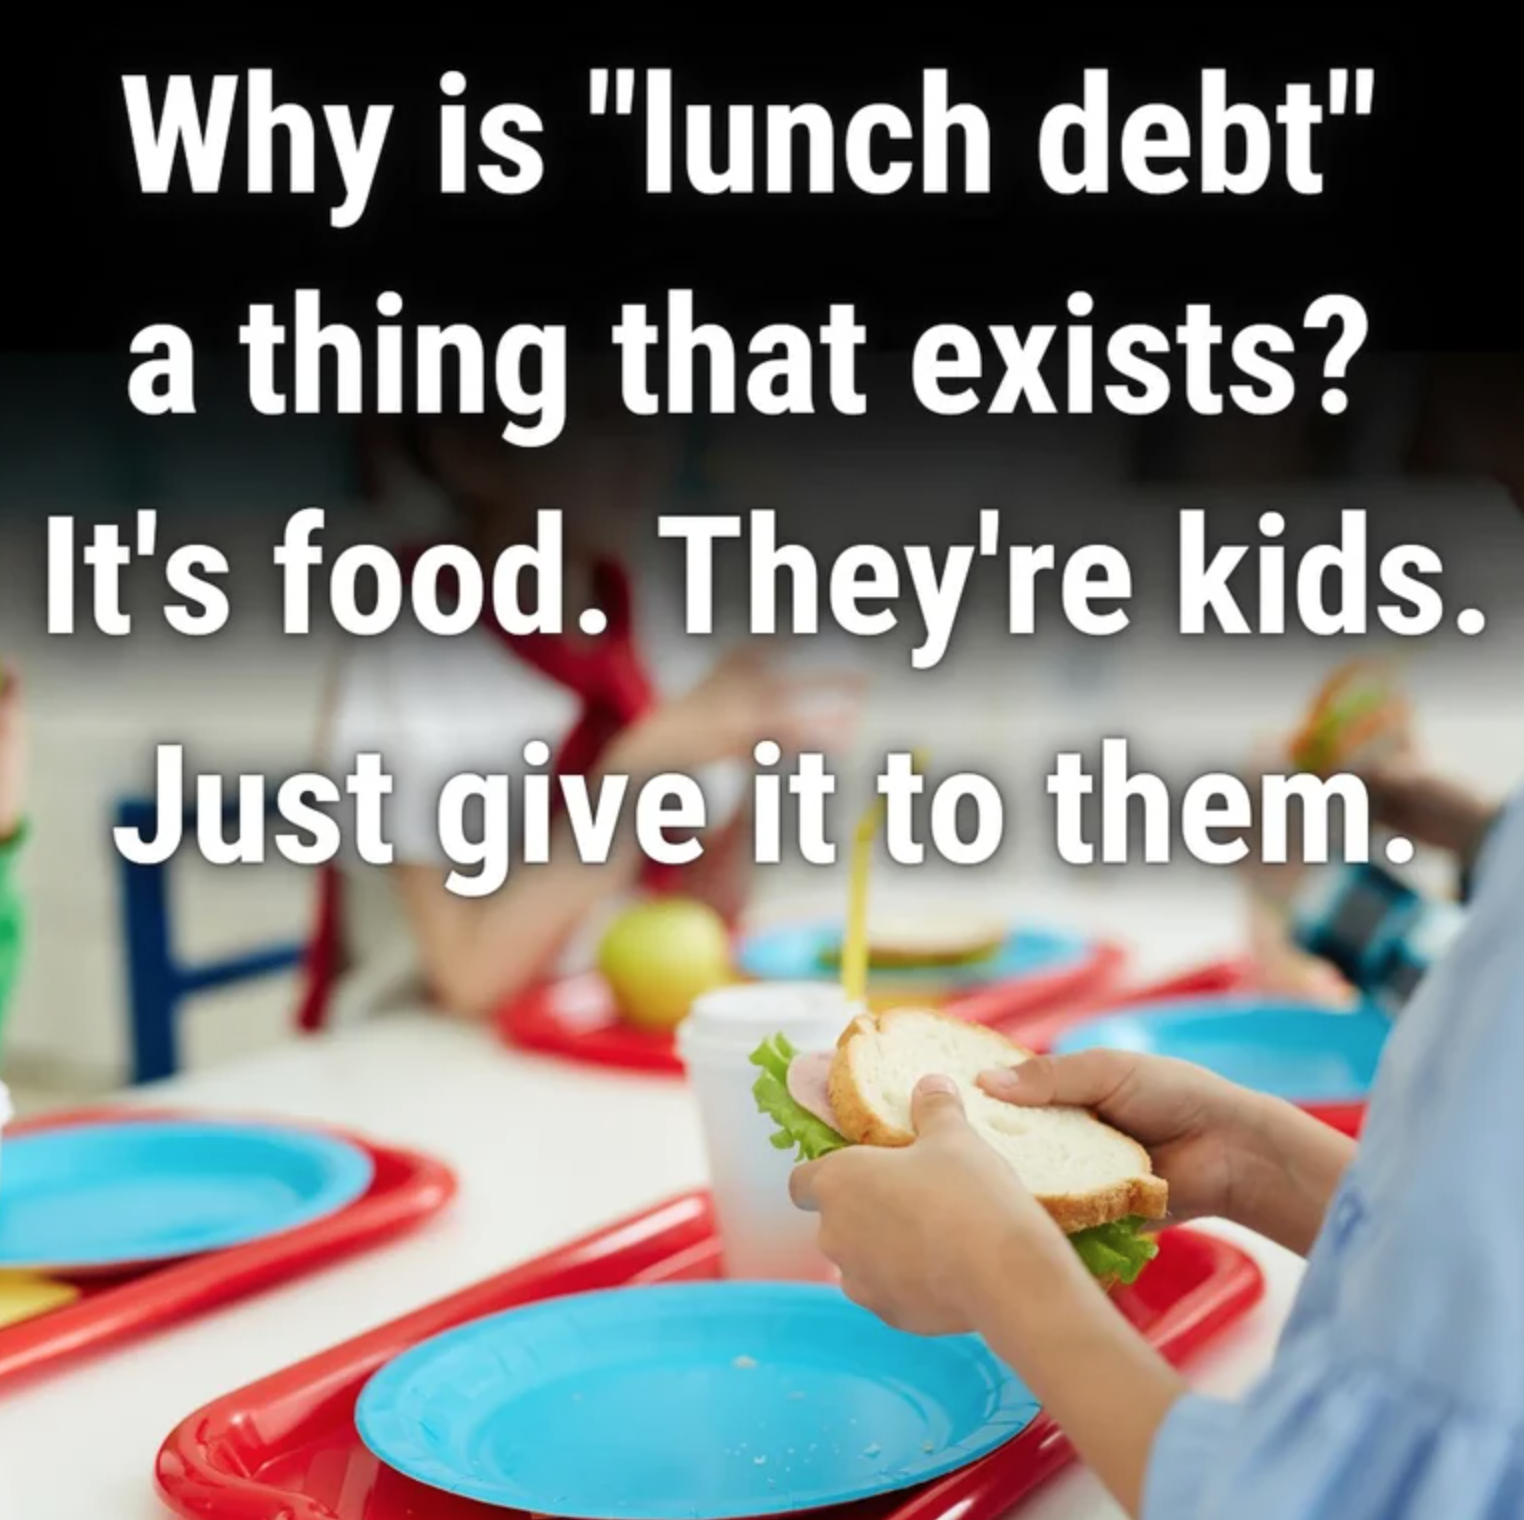 dystopian society things - School - a Why is "lunch debt" thing that exists? It's food. They're kids. Just give it to them.